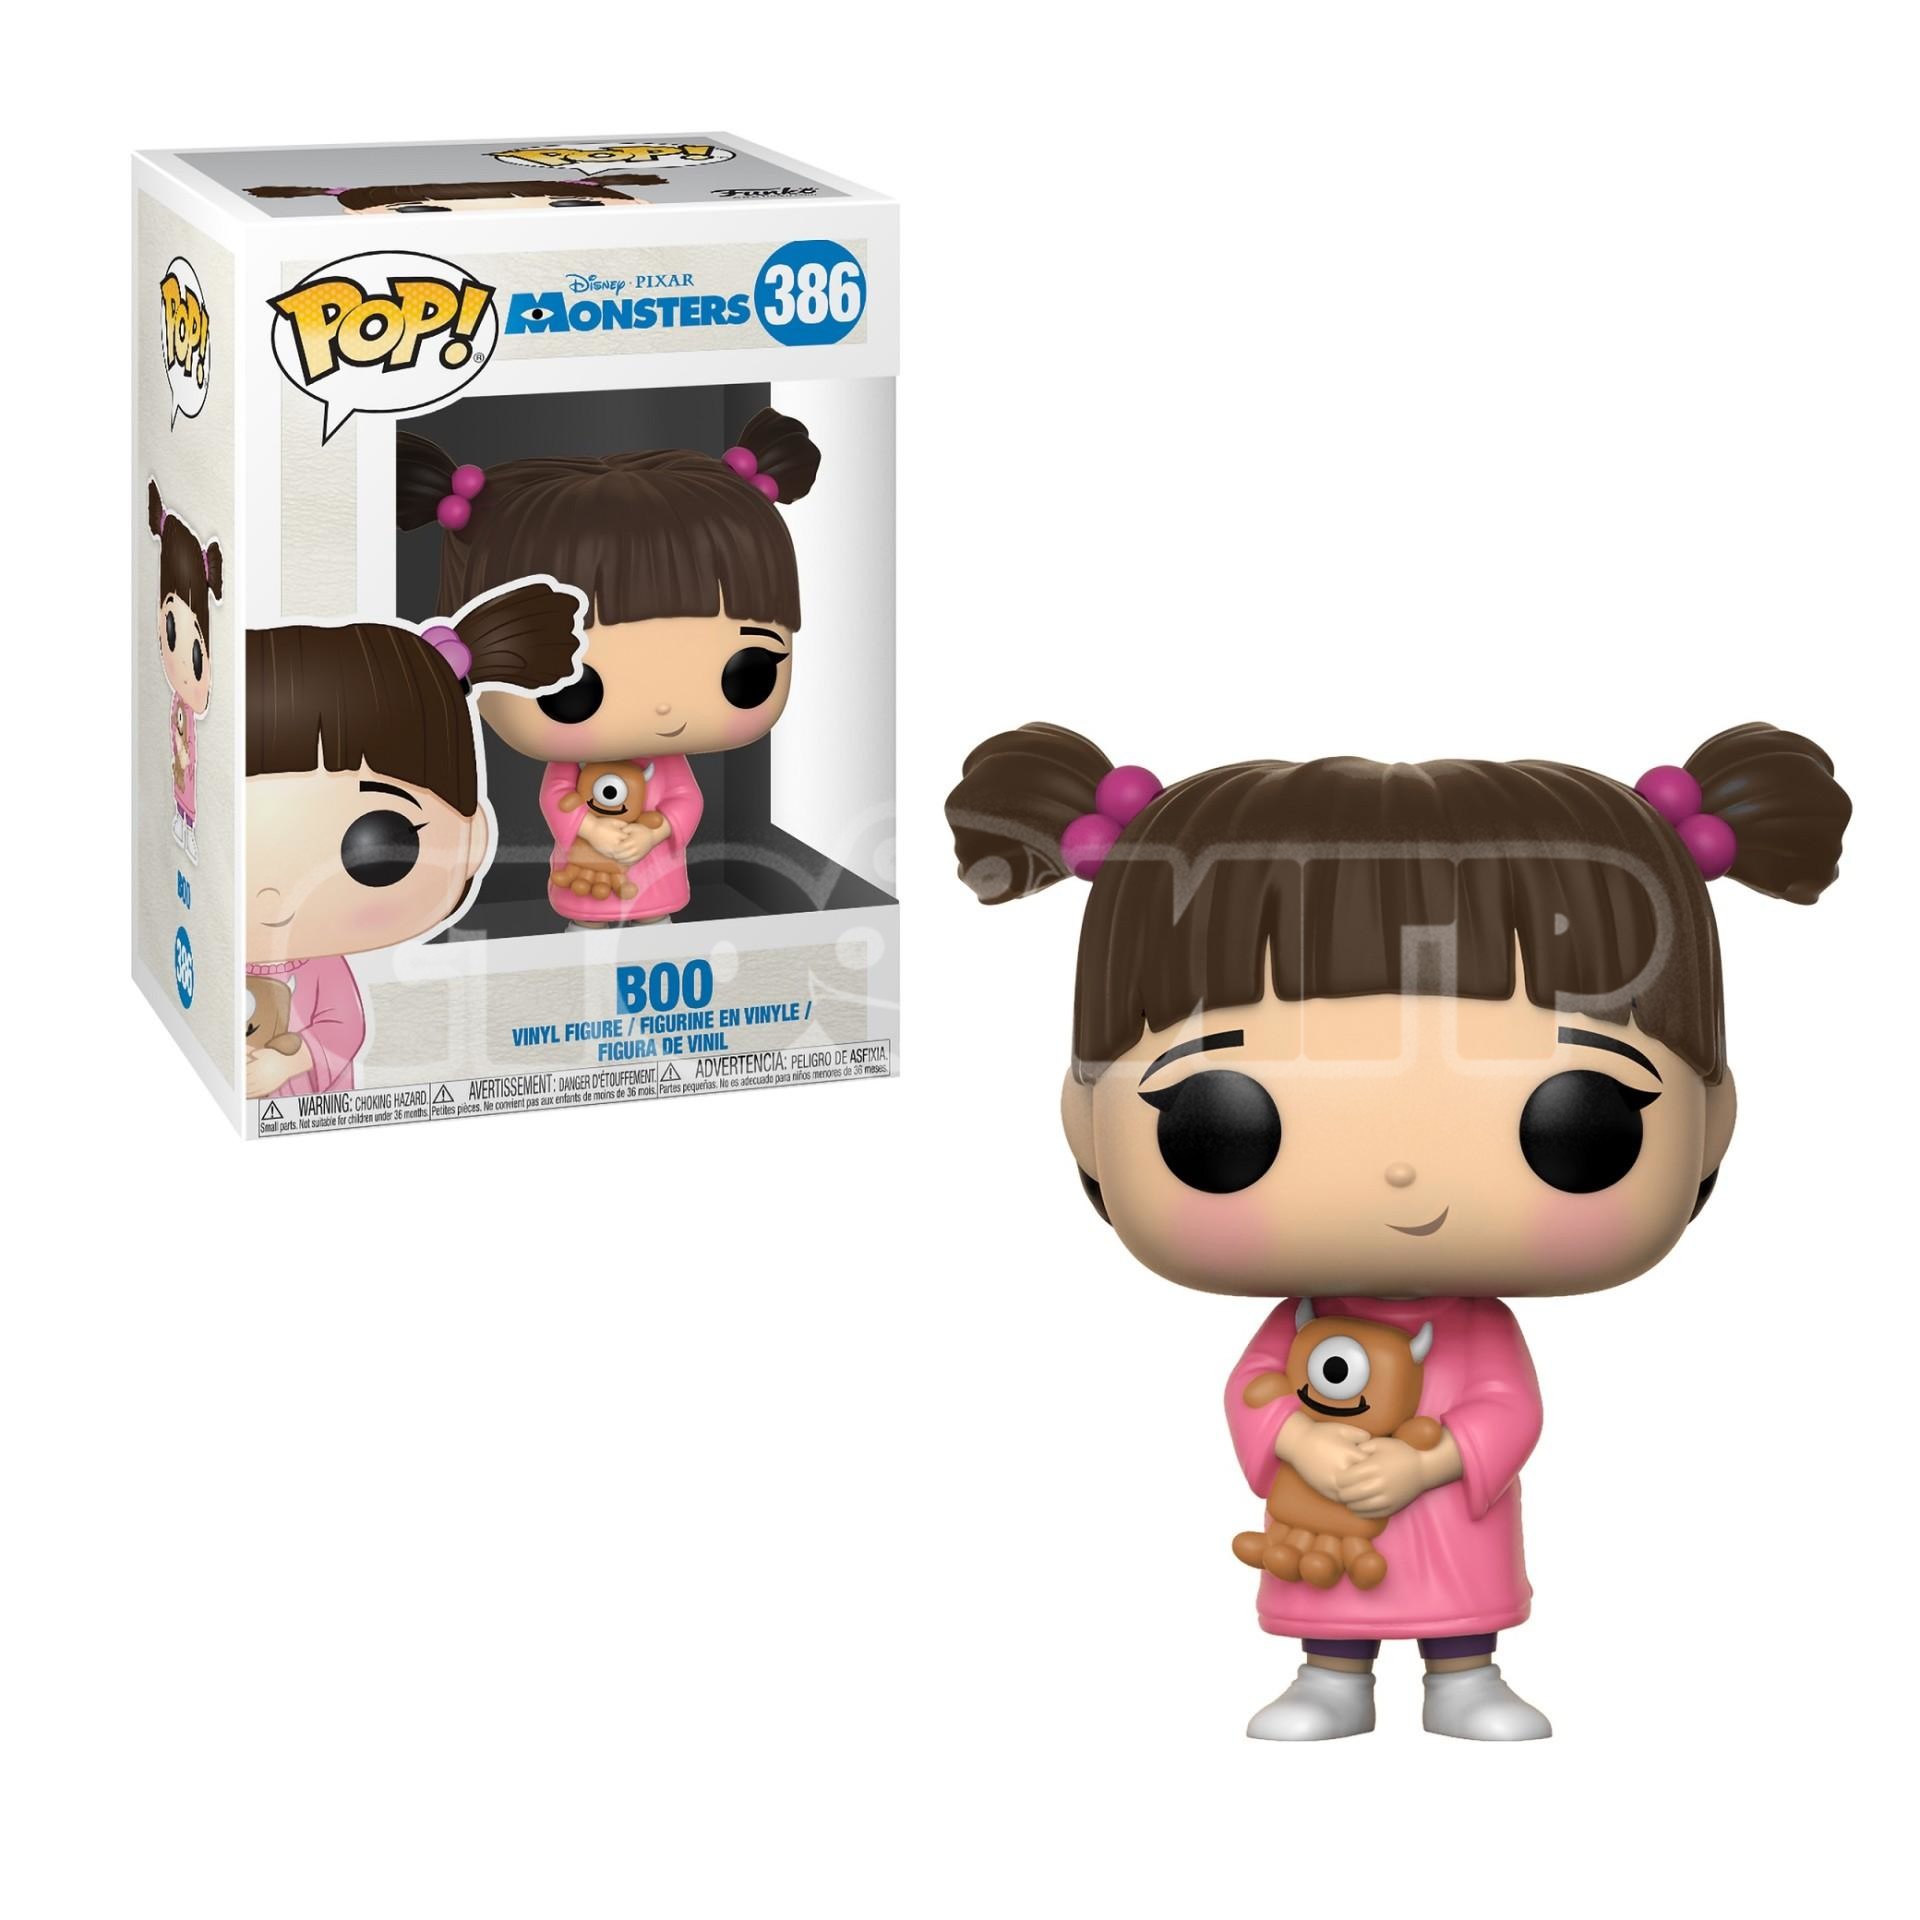 Funko Pop. Disney Monsters Inc Boo with Little Mikey